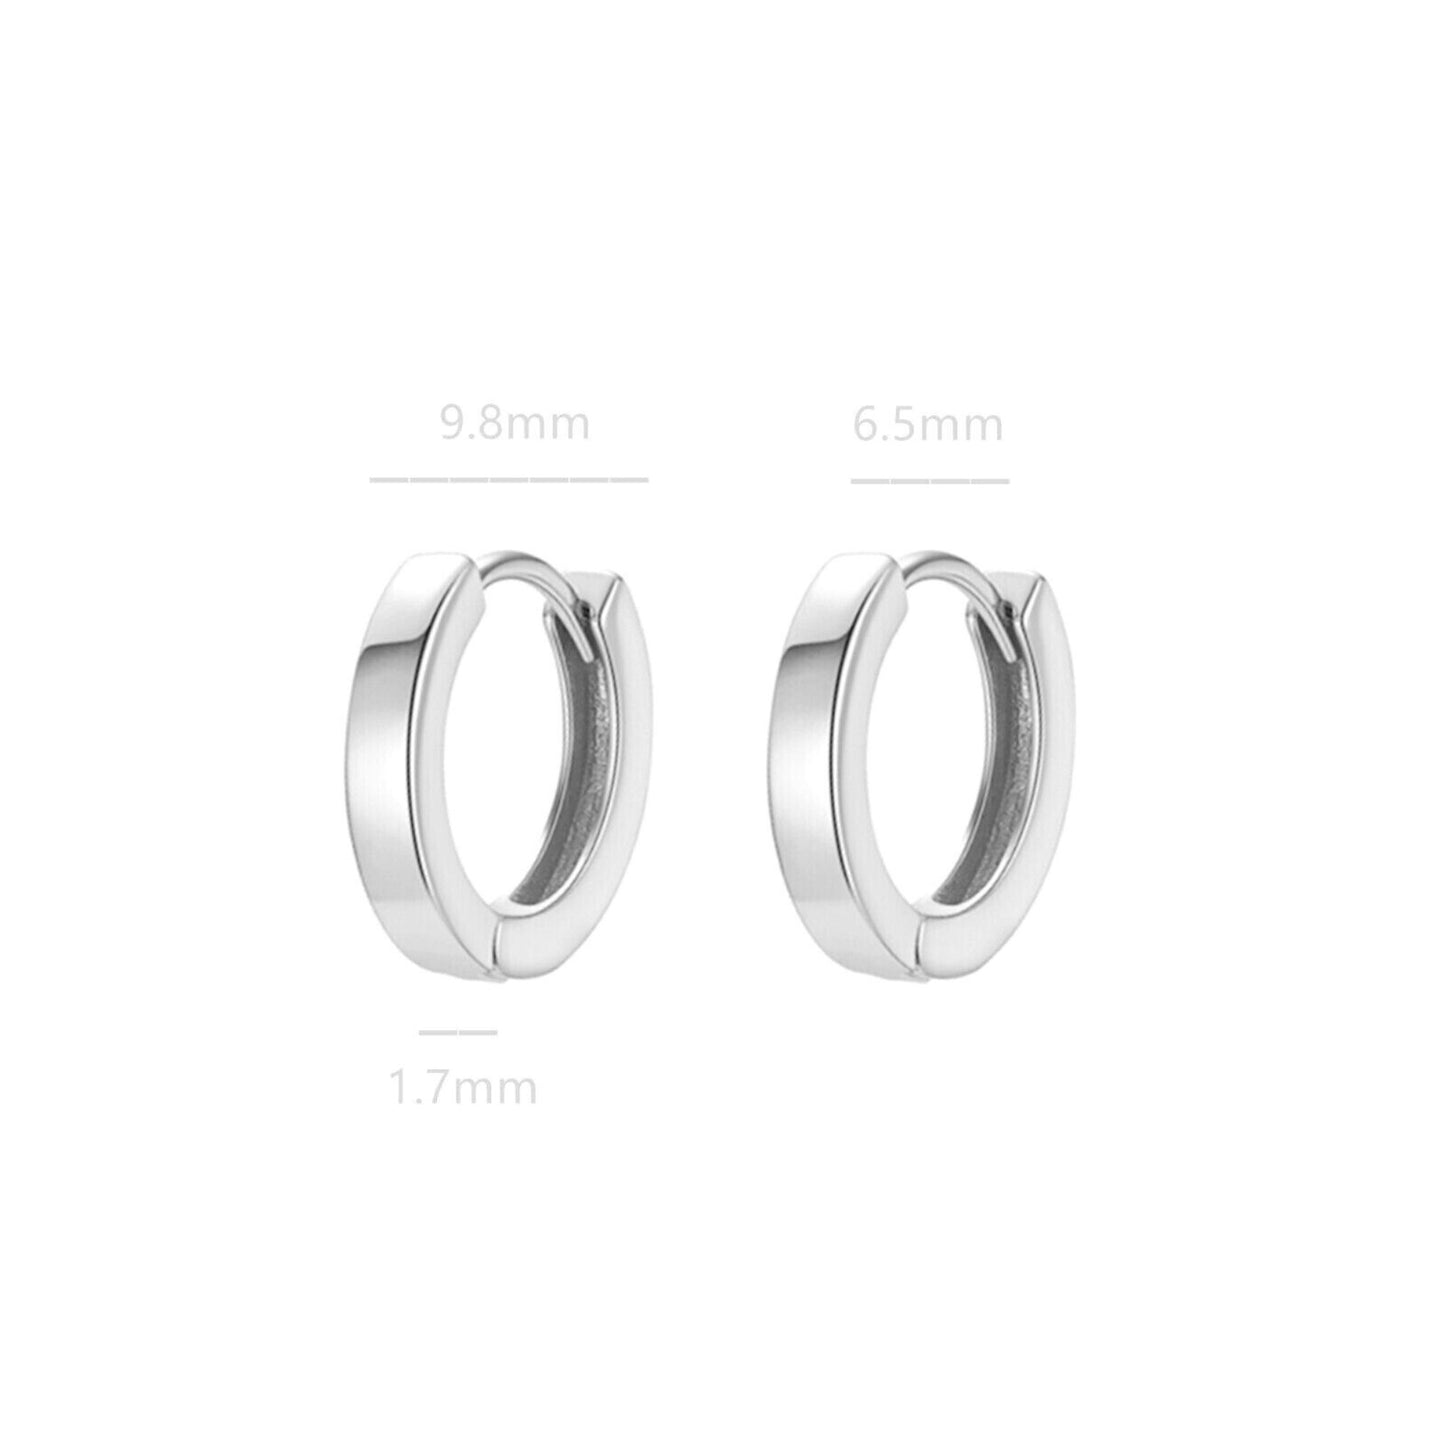 925 Sterling Silver Huggie Hoop Earrings with 1.7mm Thin Band and 6.5mm Diameter